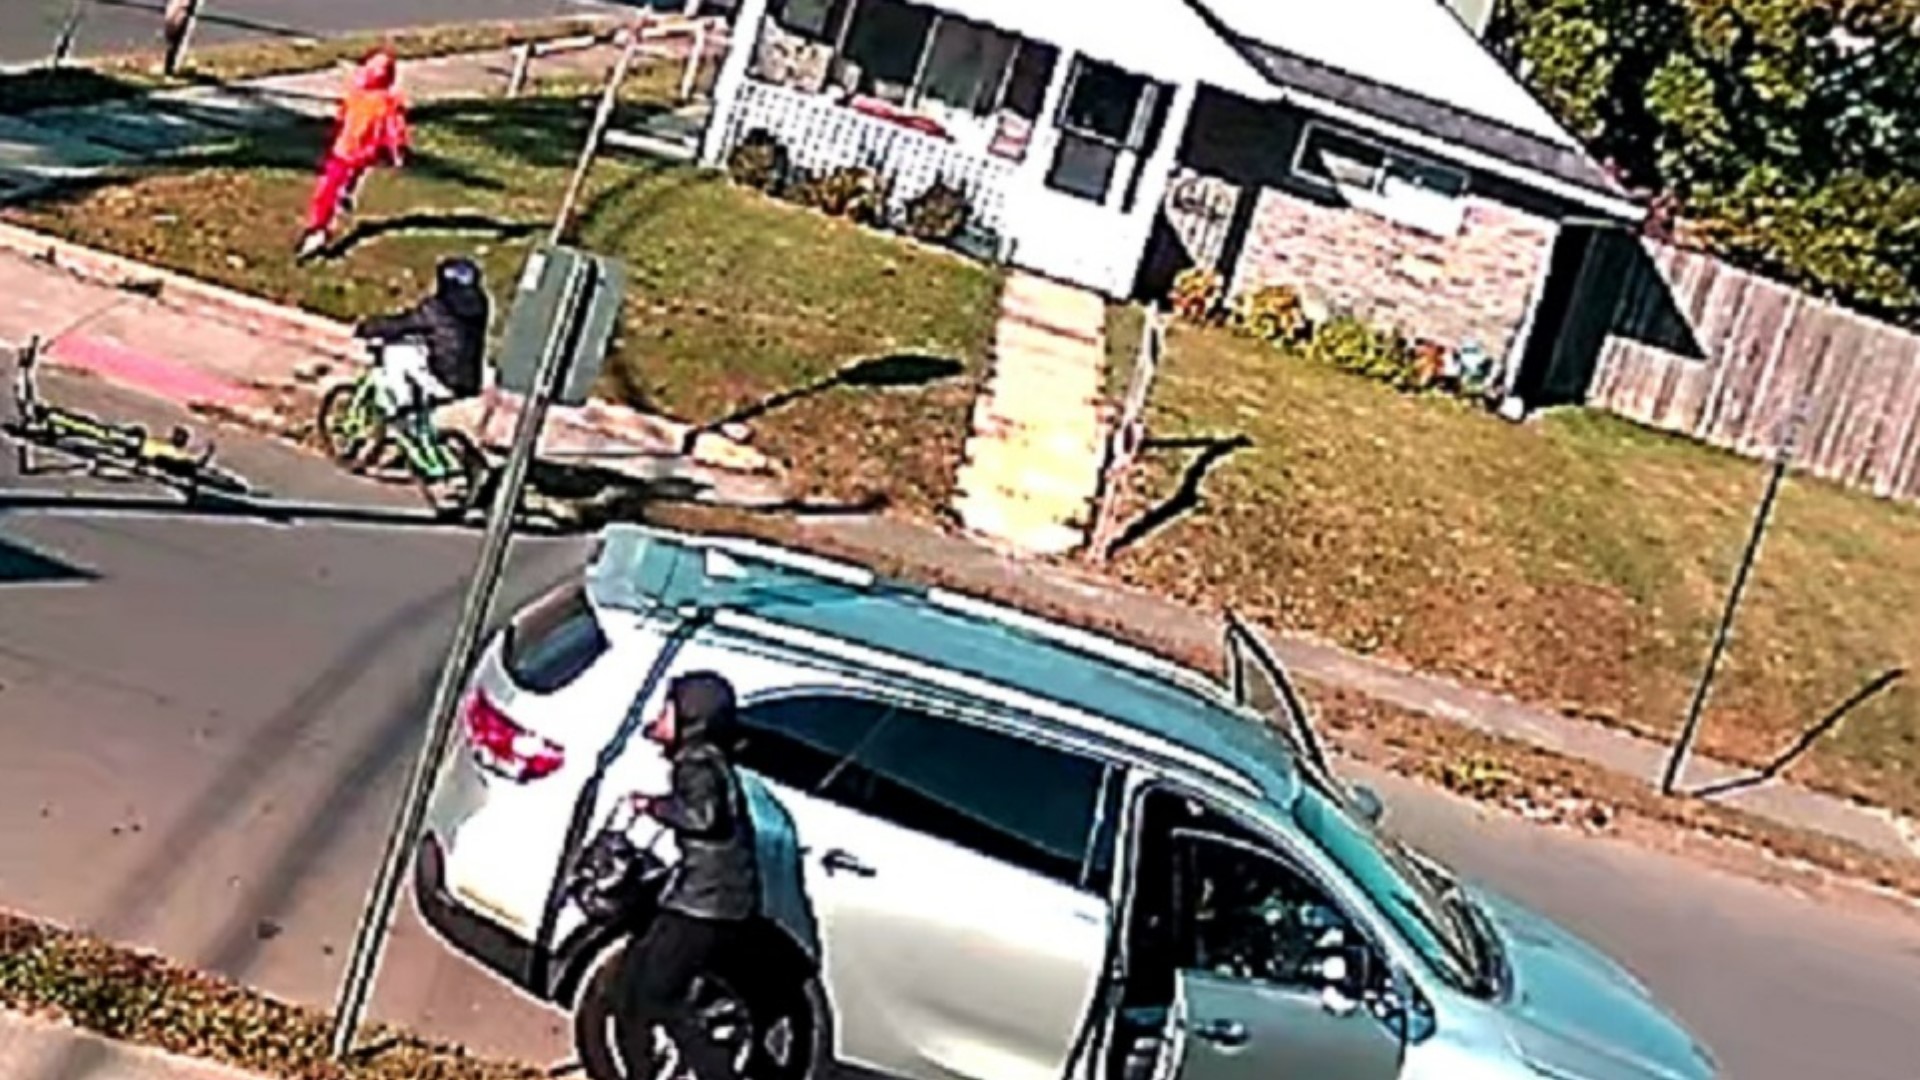 Columbus police are looking for three suspects in connection with the theft.